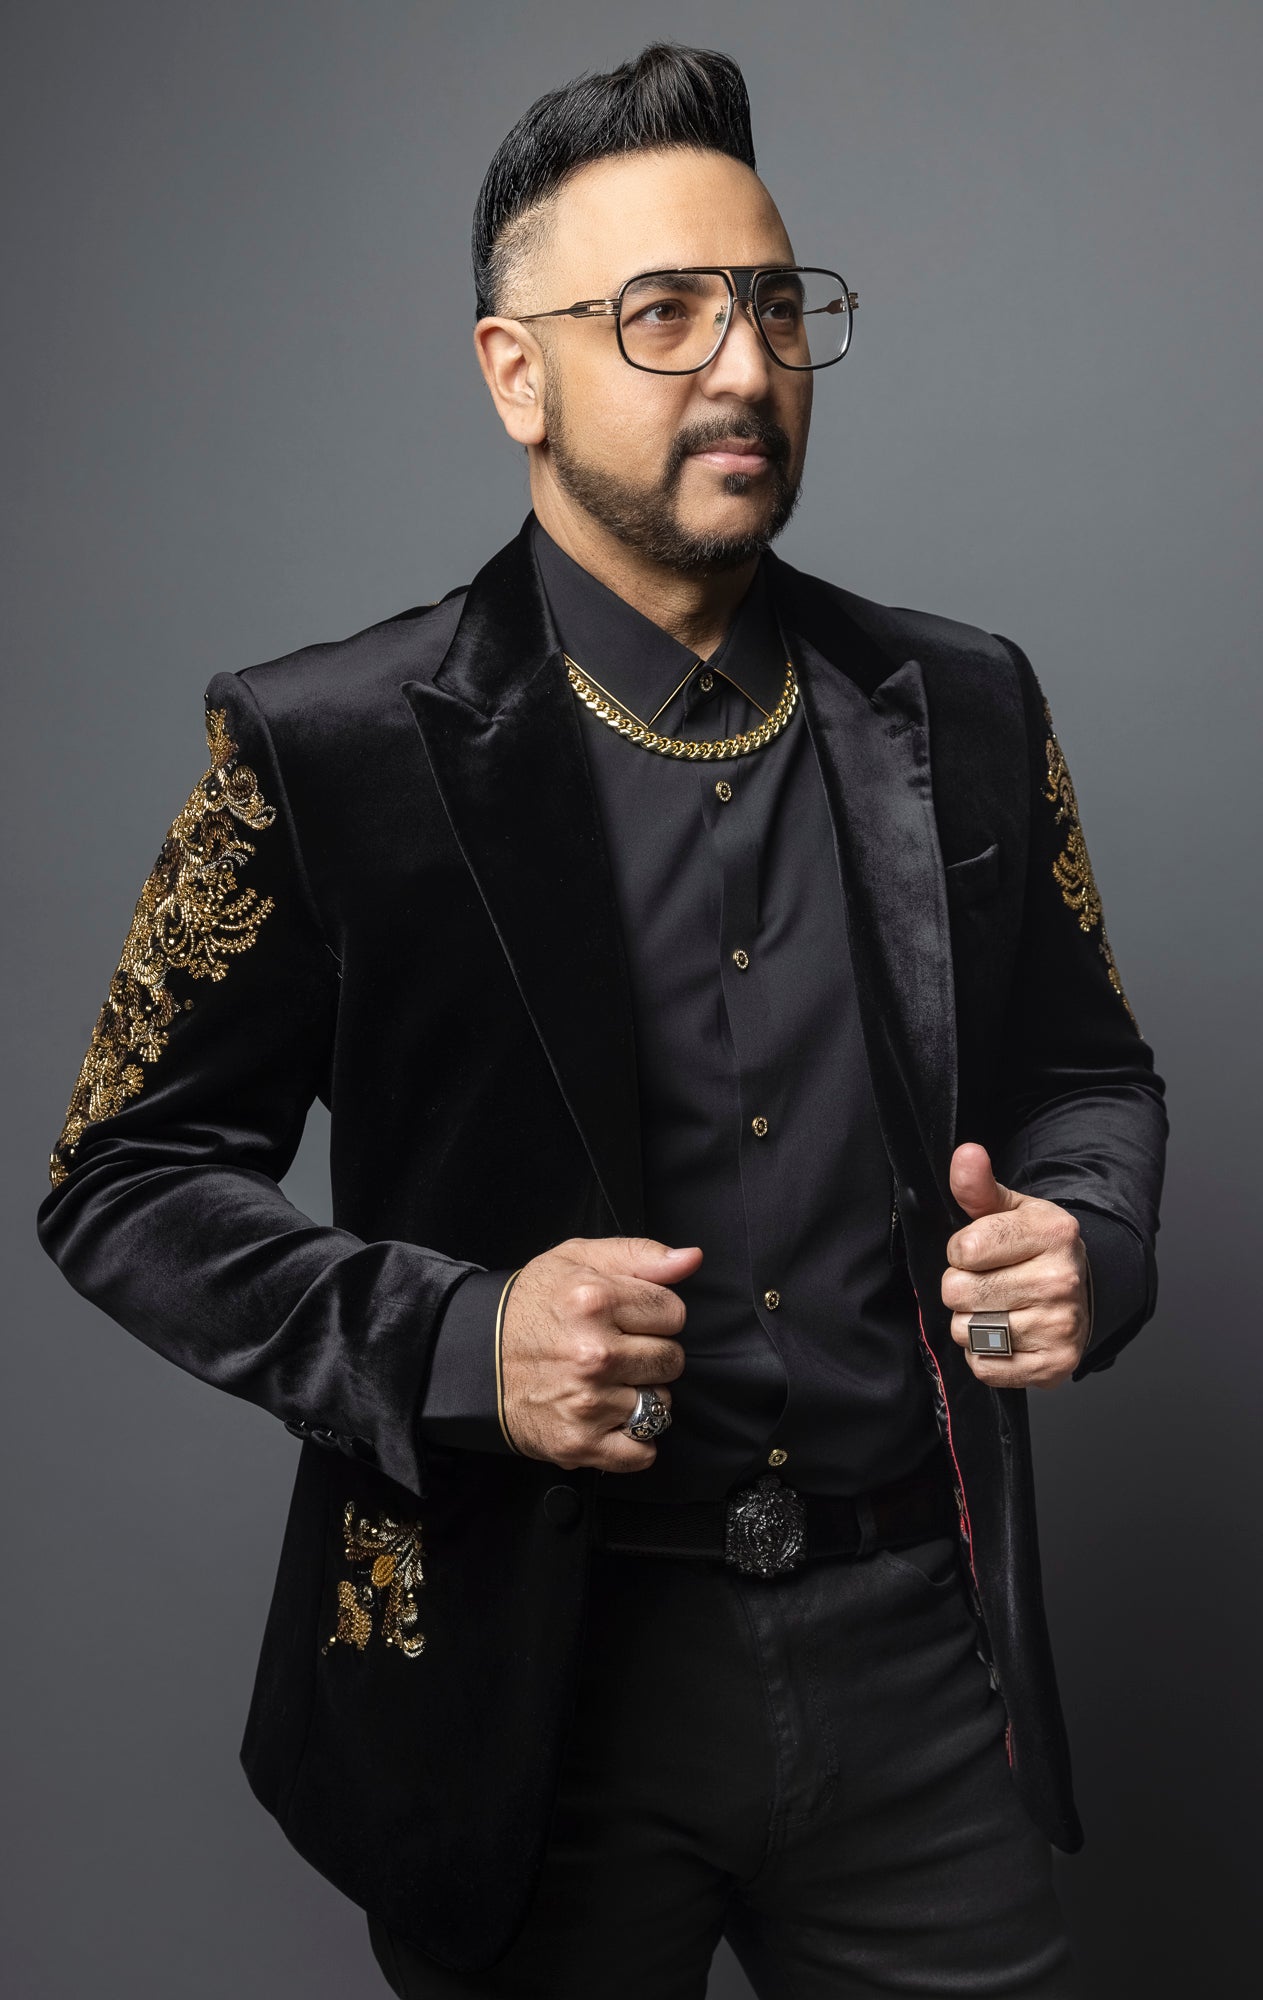  luxurious suit boasts a Sequin and Beads Velvet design, as well as a peak lapel collar and long sleevesLuxury black blazer boasts gold Sequin and Beads, Velvet design, as well as a peak lapel collar and long sleeves